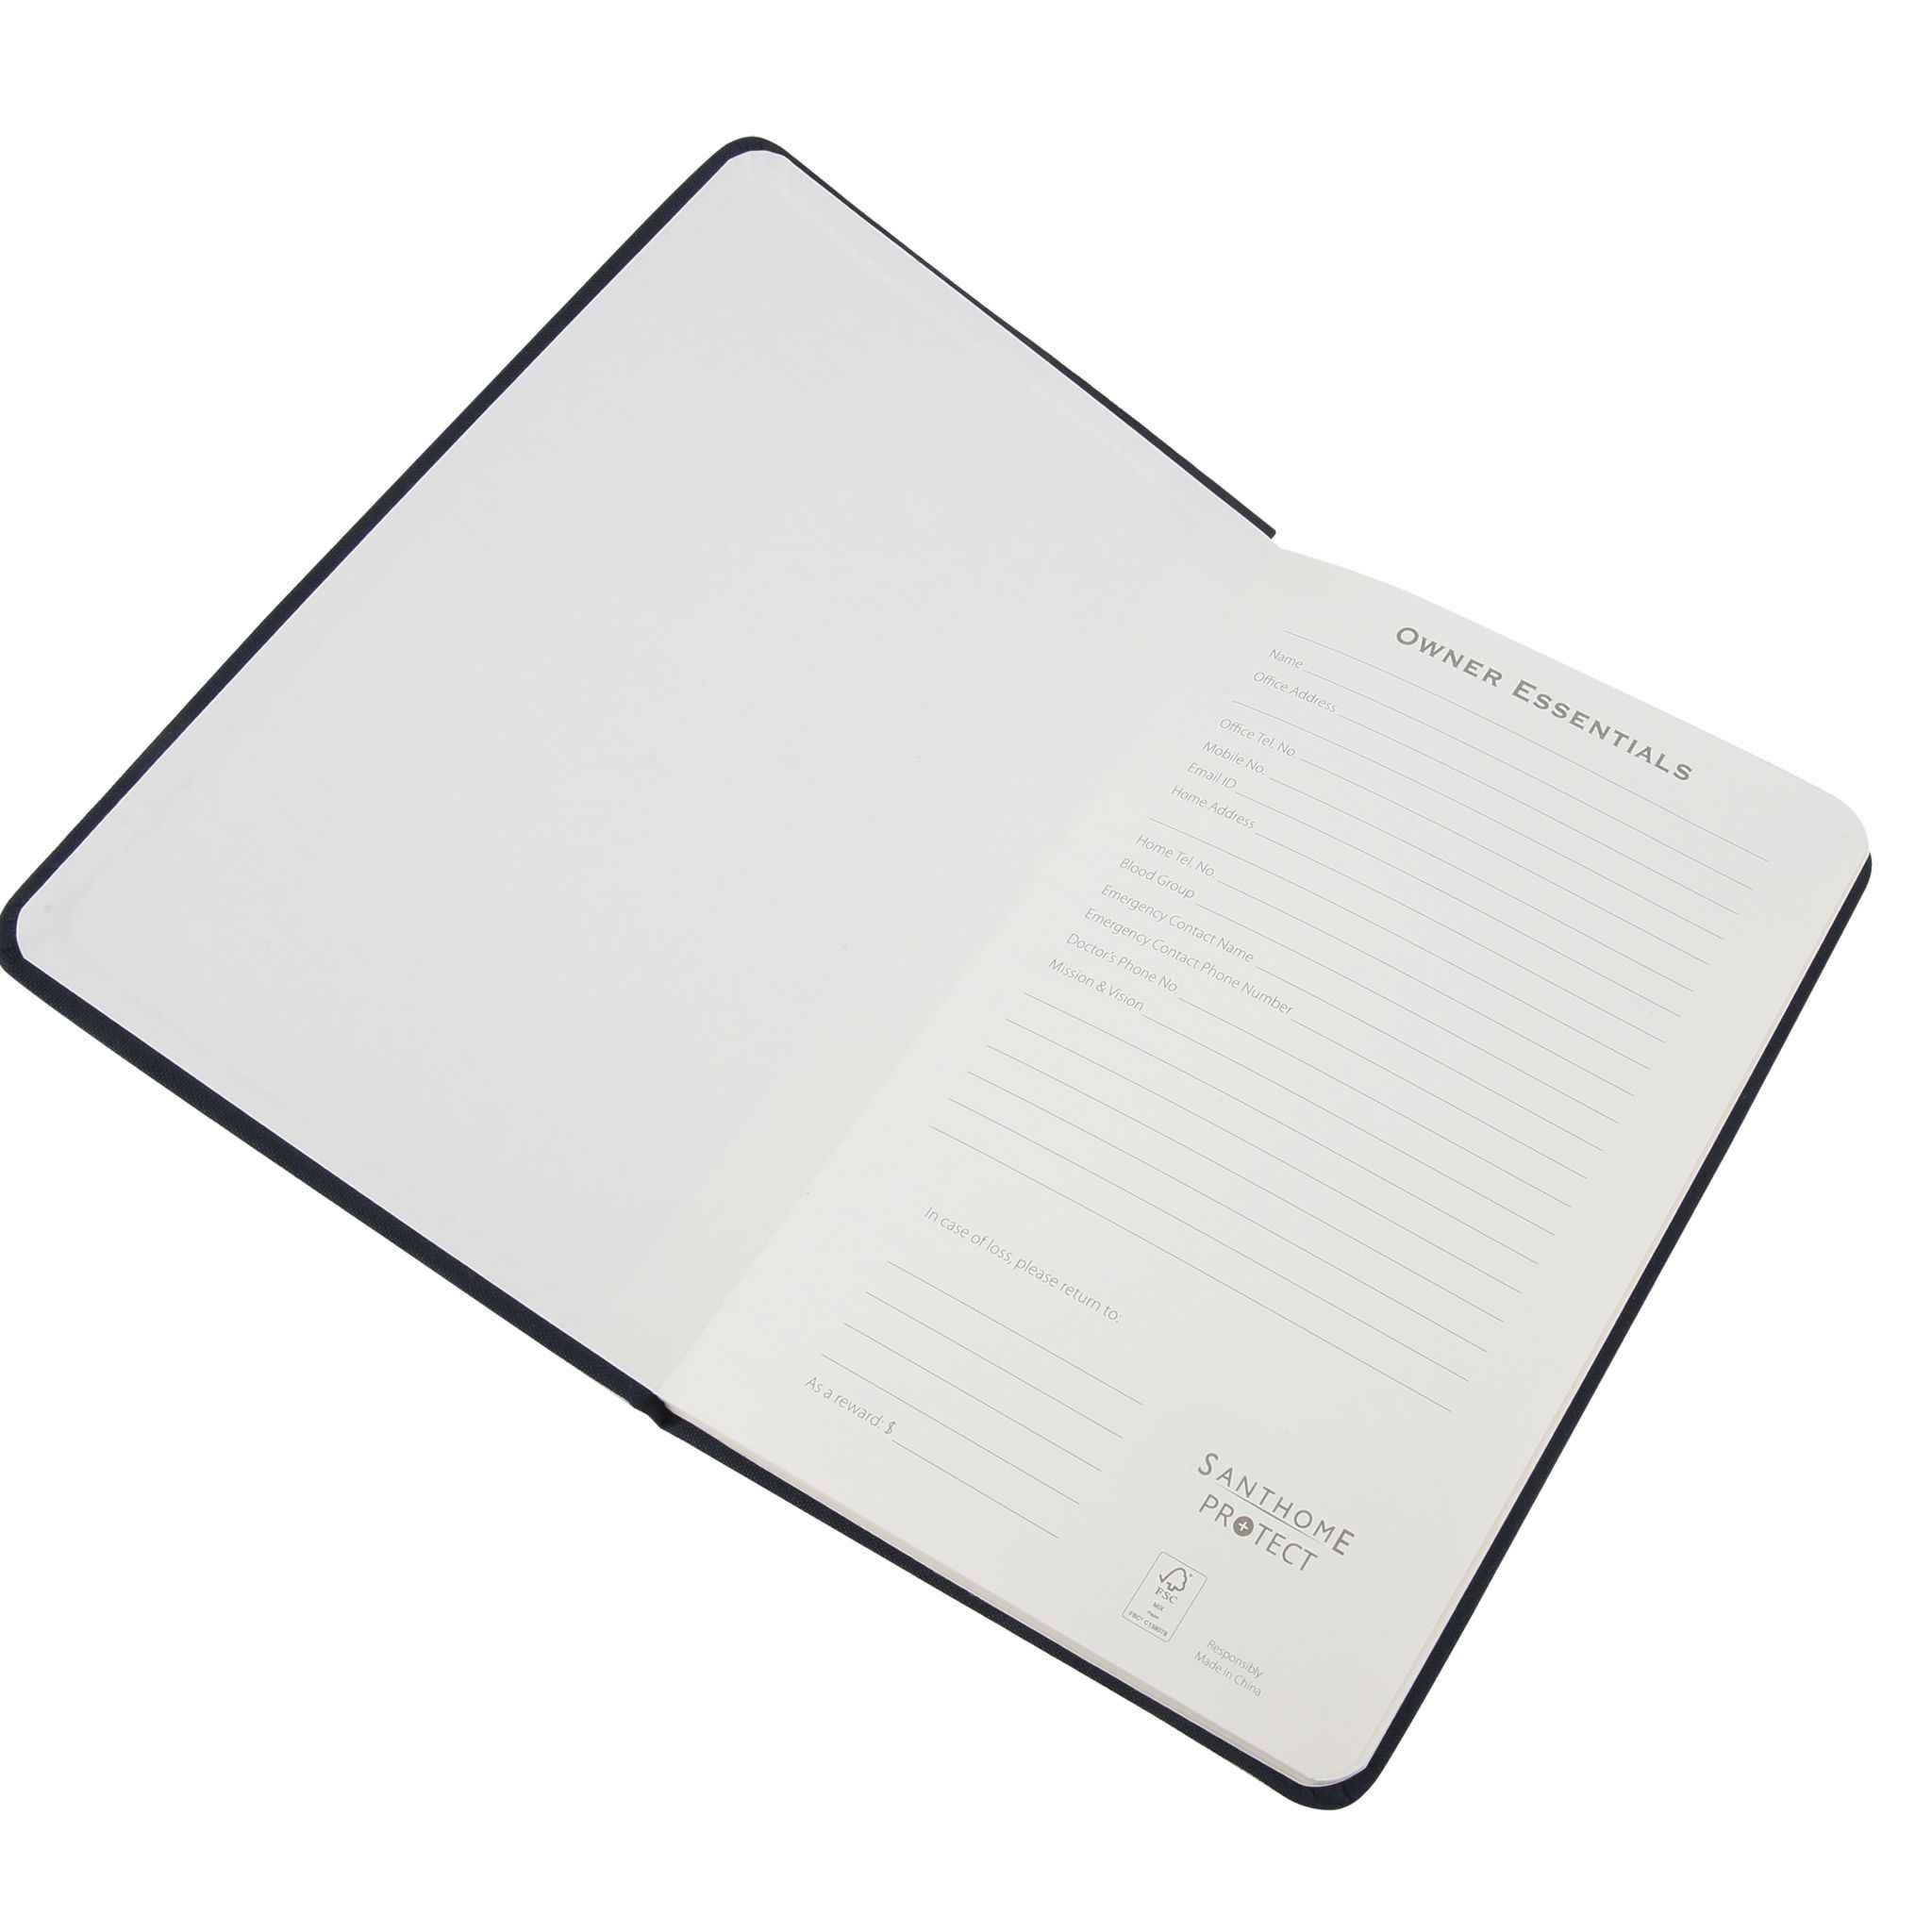 Anti-Microbial Notebook shown open